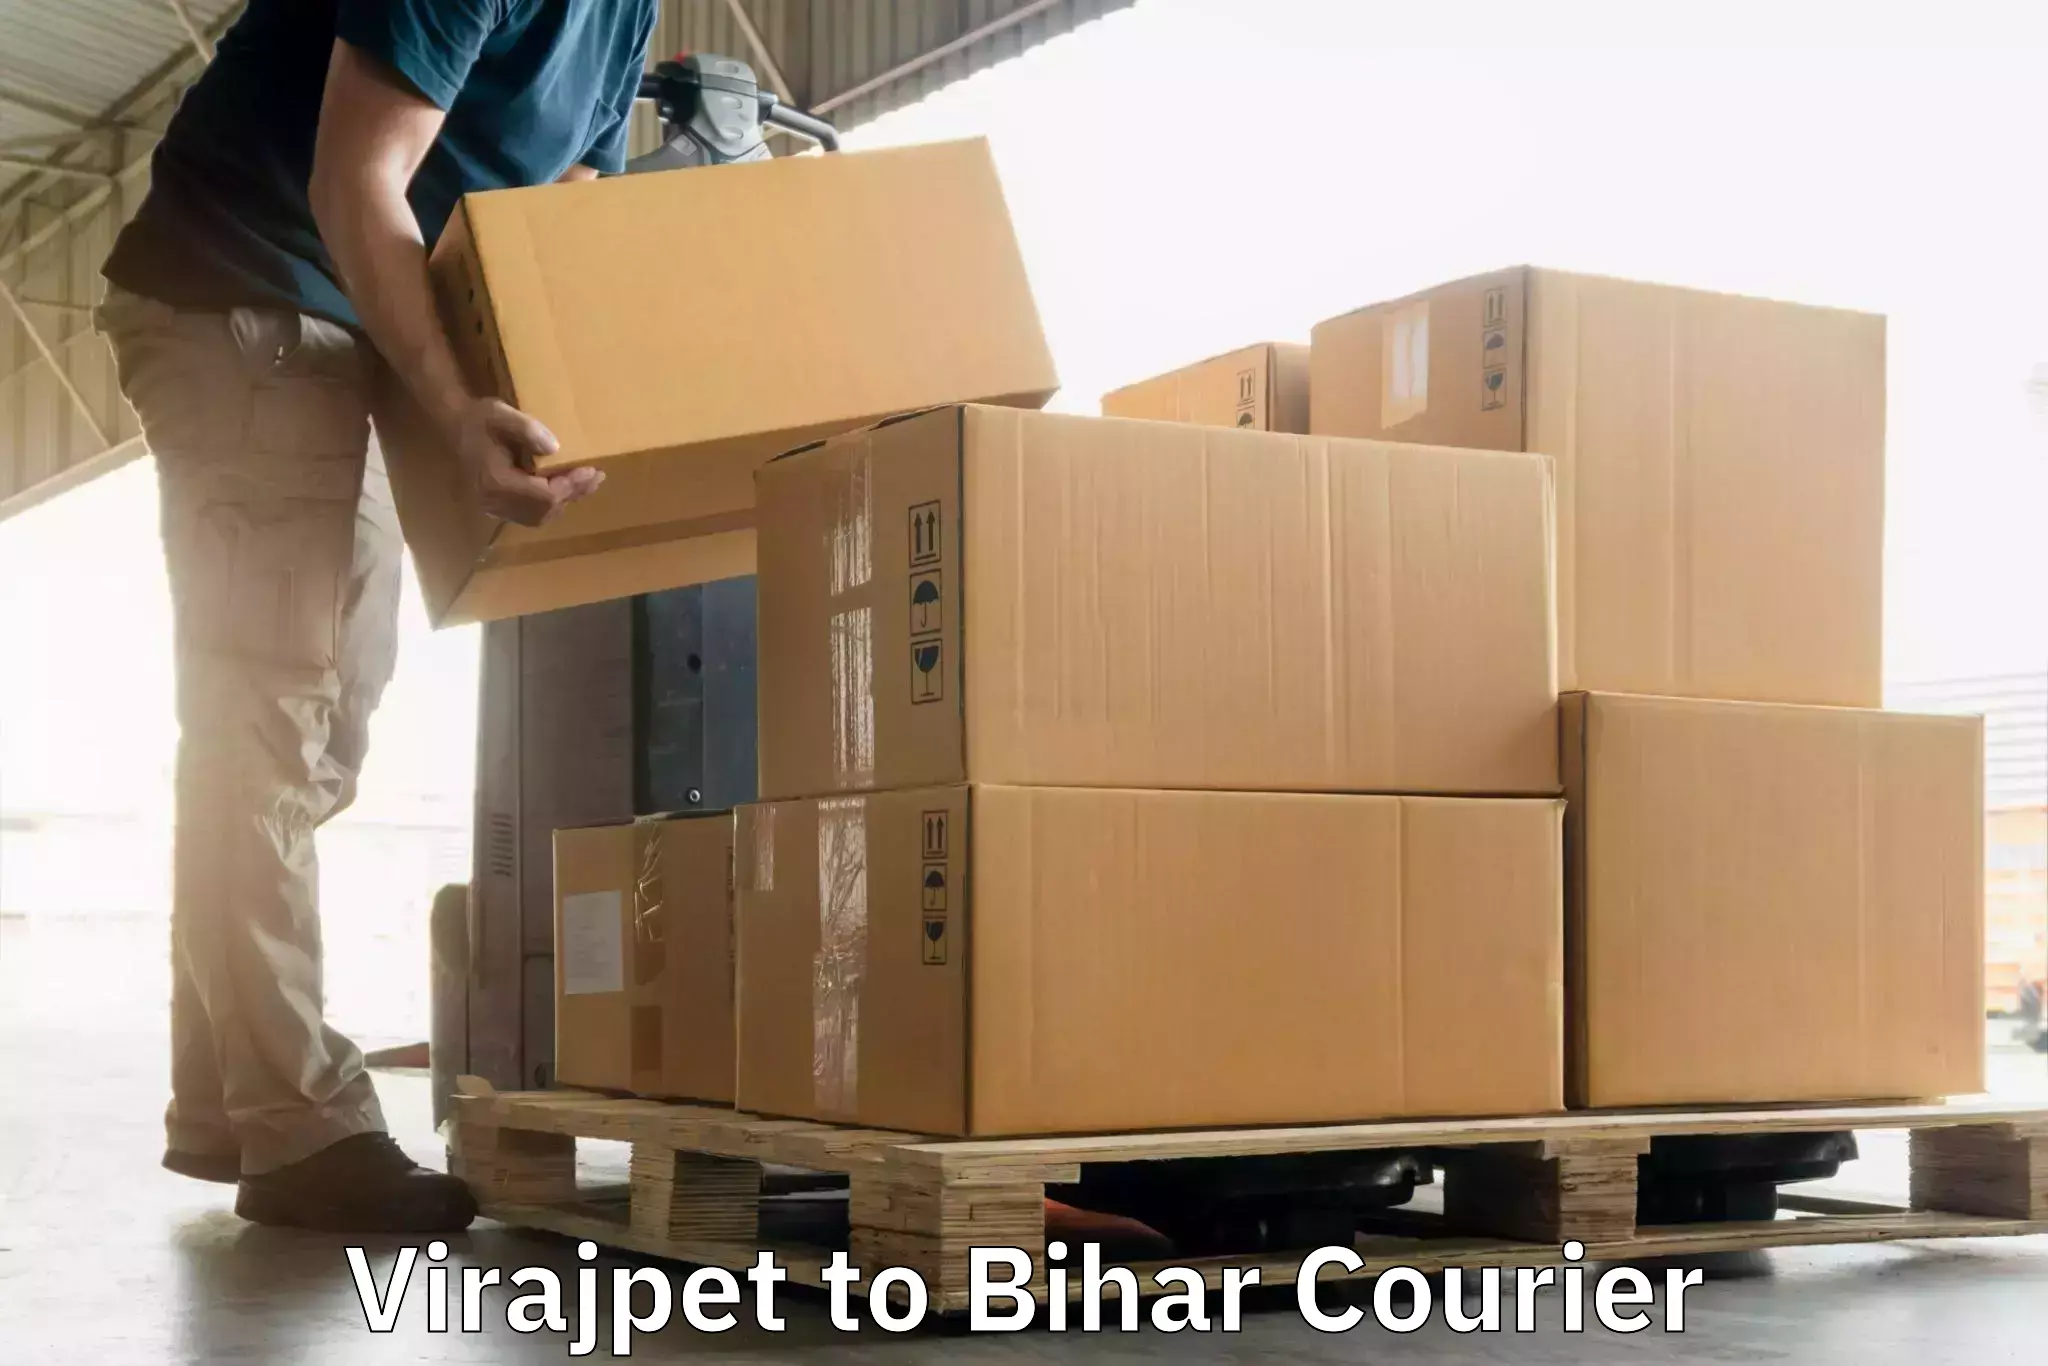 Subscription-based courier Virajpet to Vaishali